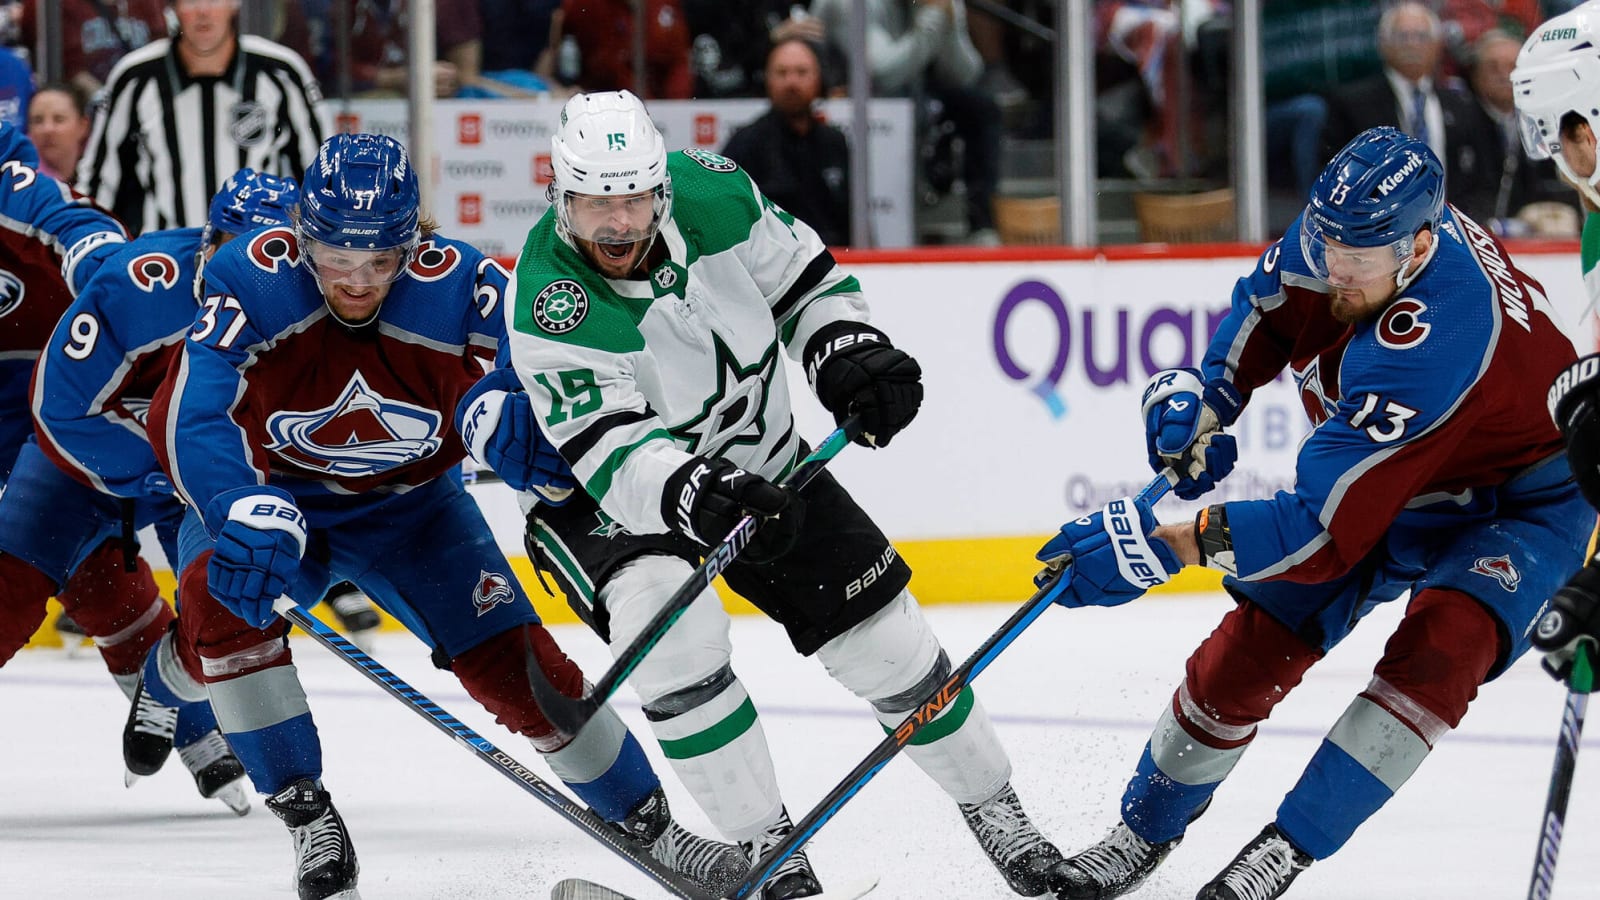 3 Takeaways From Avalanche’s Game 4 Loss to Stars